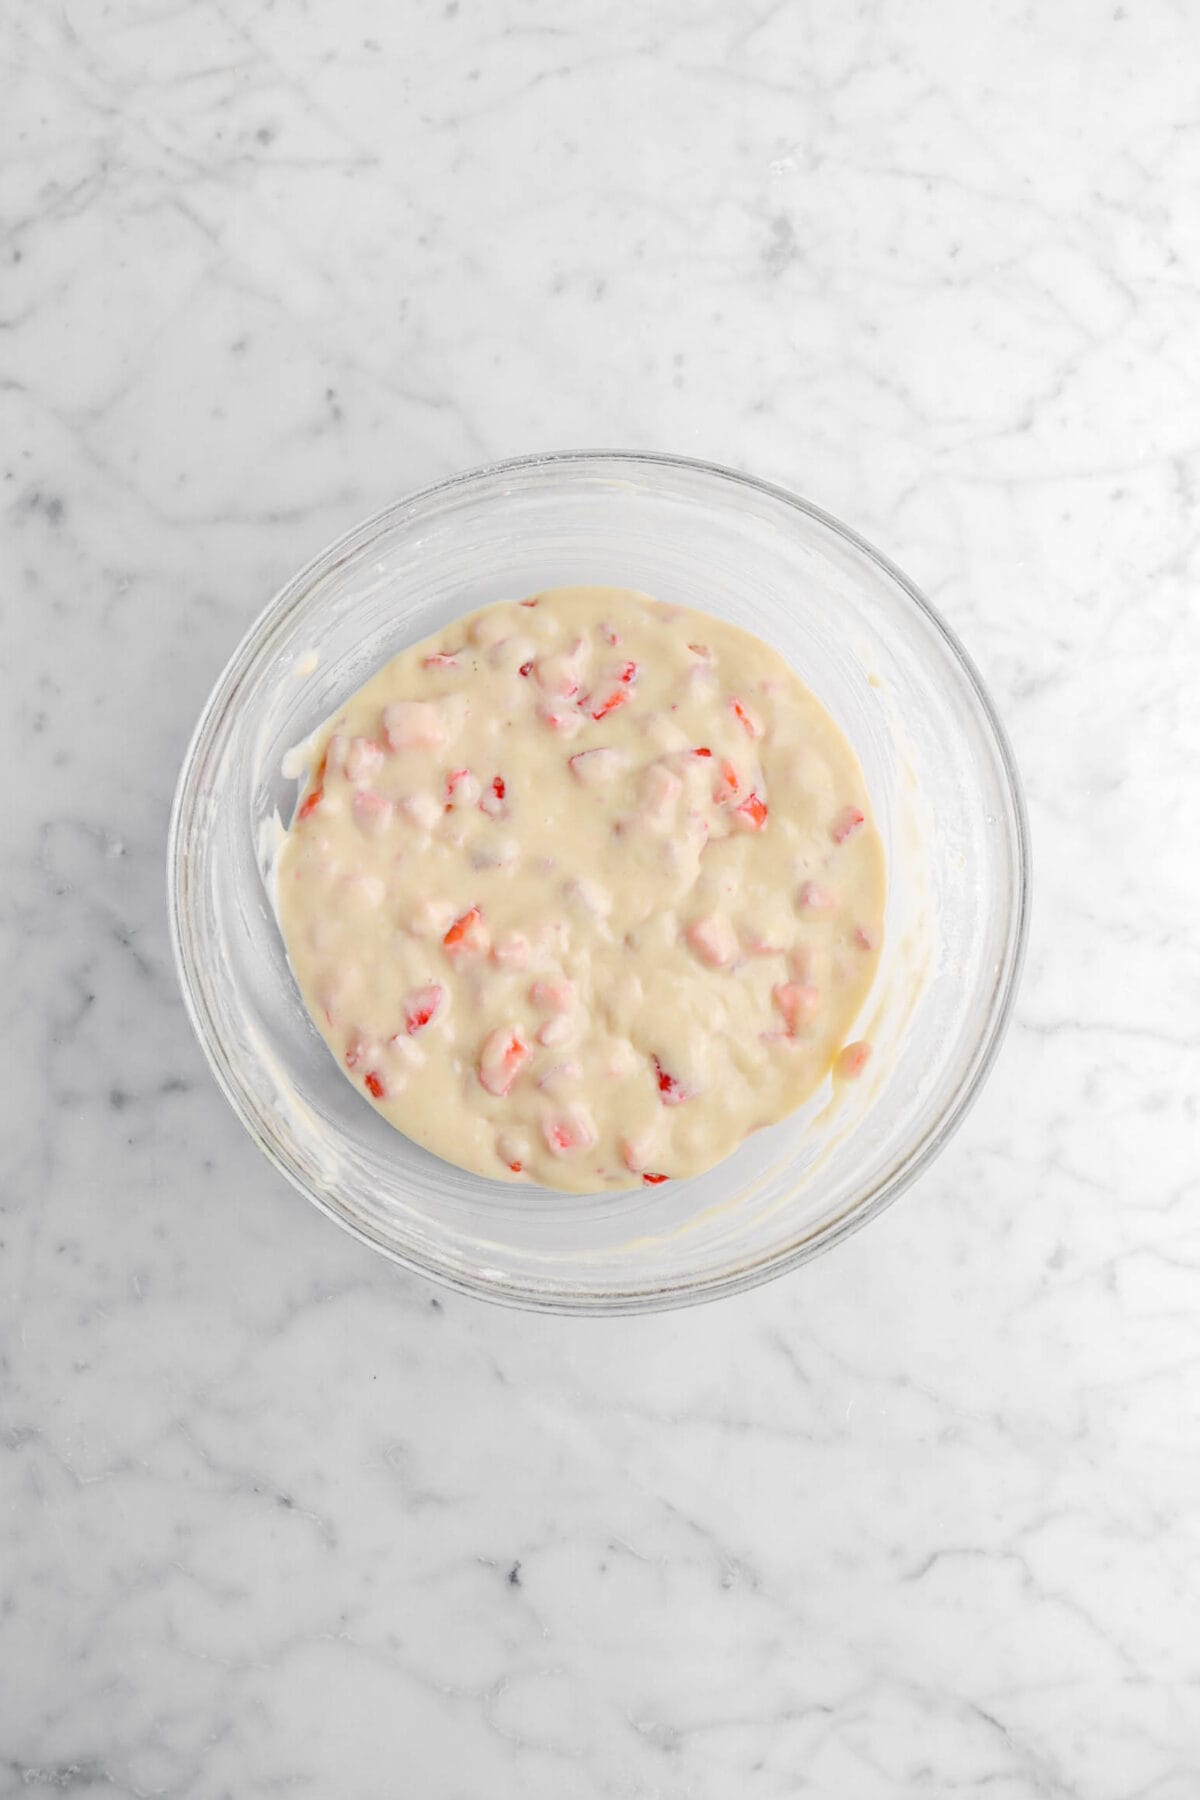 strawberries mixed into cake batter.